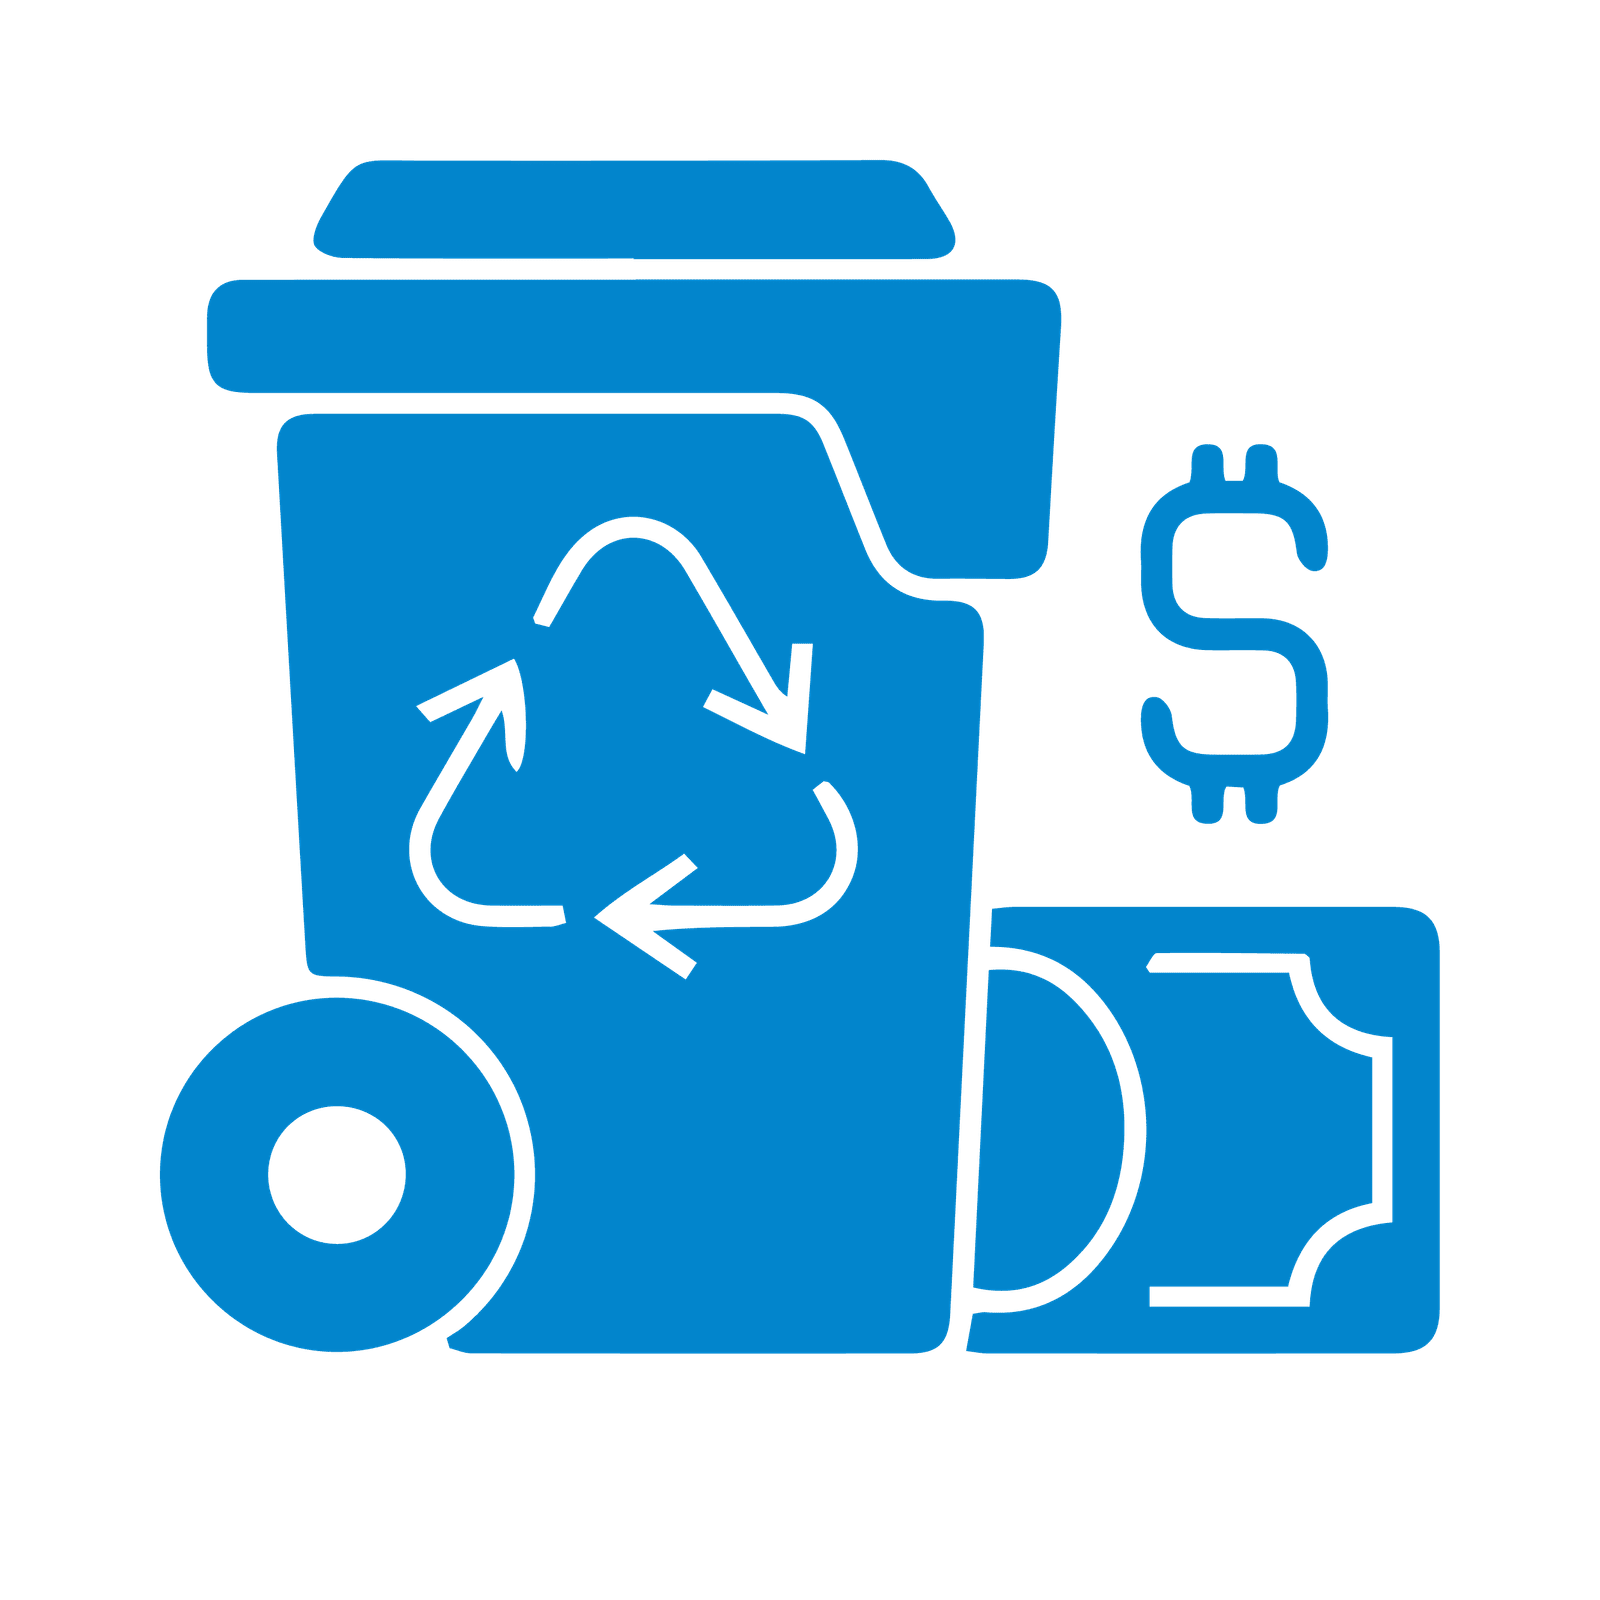 Waste Management Software Solutions